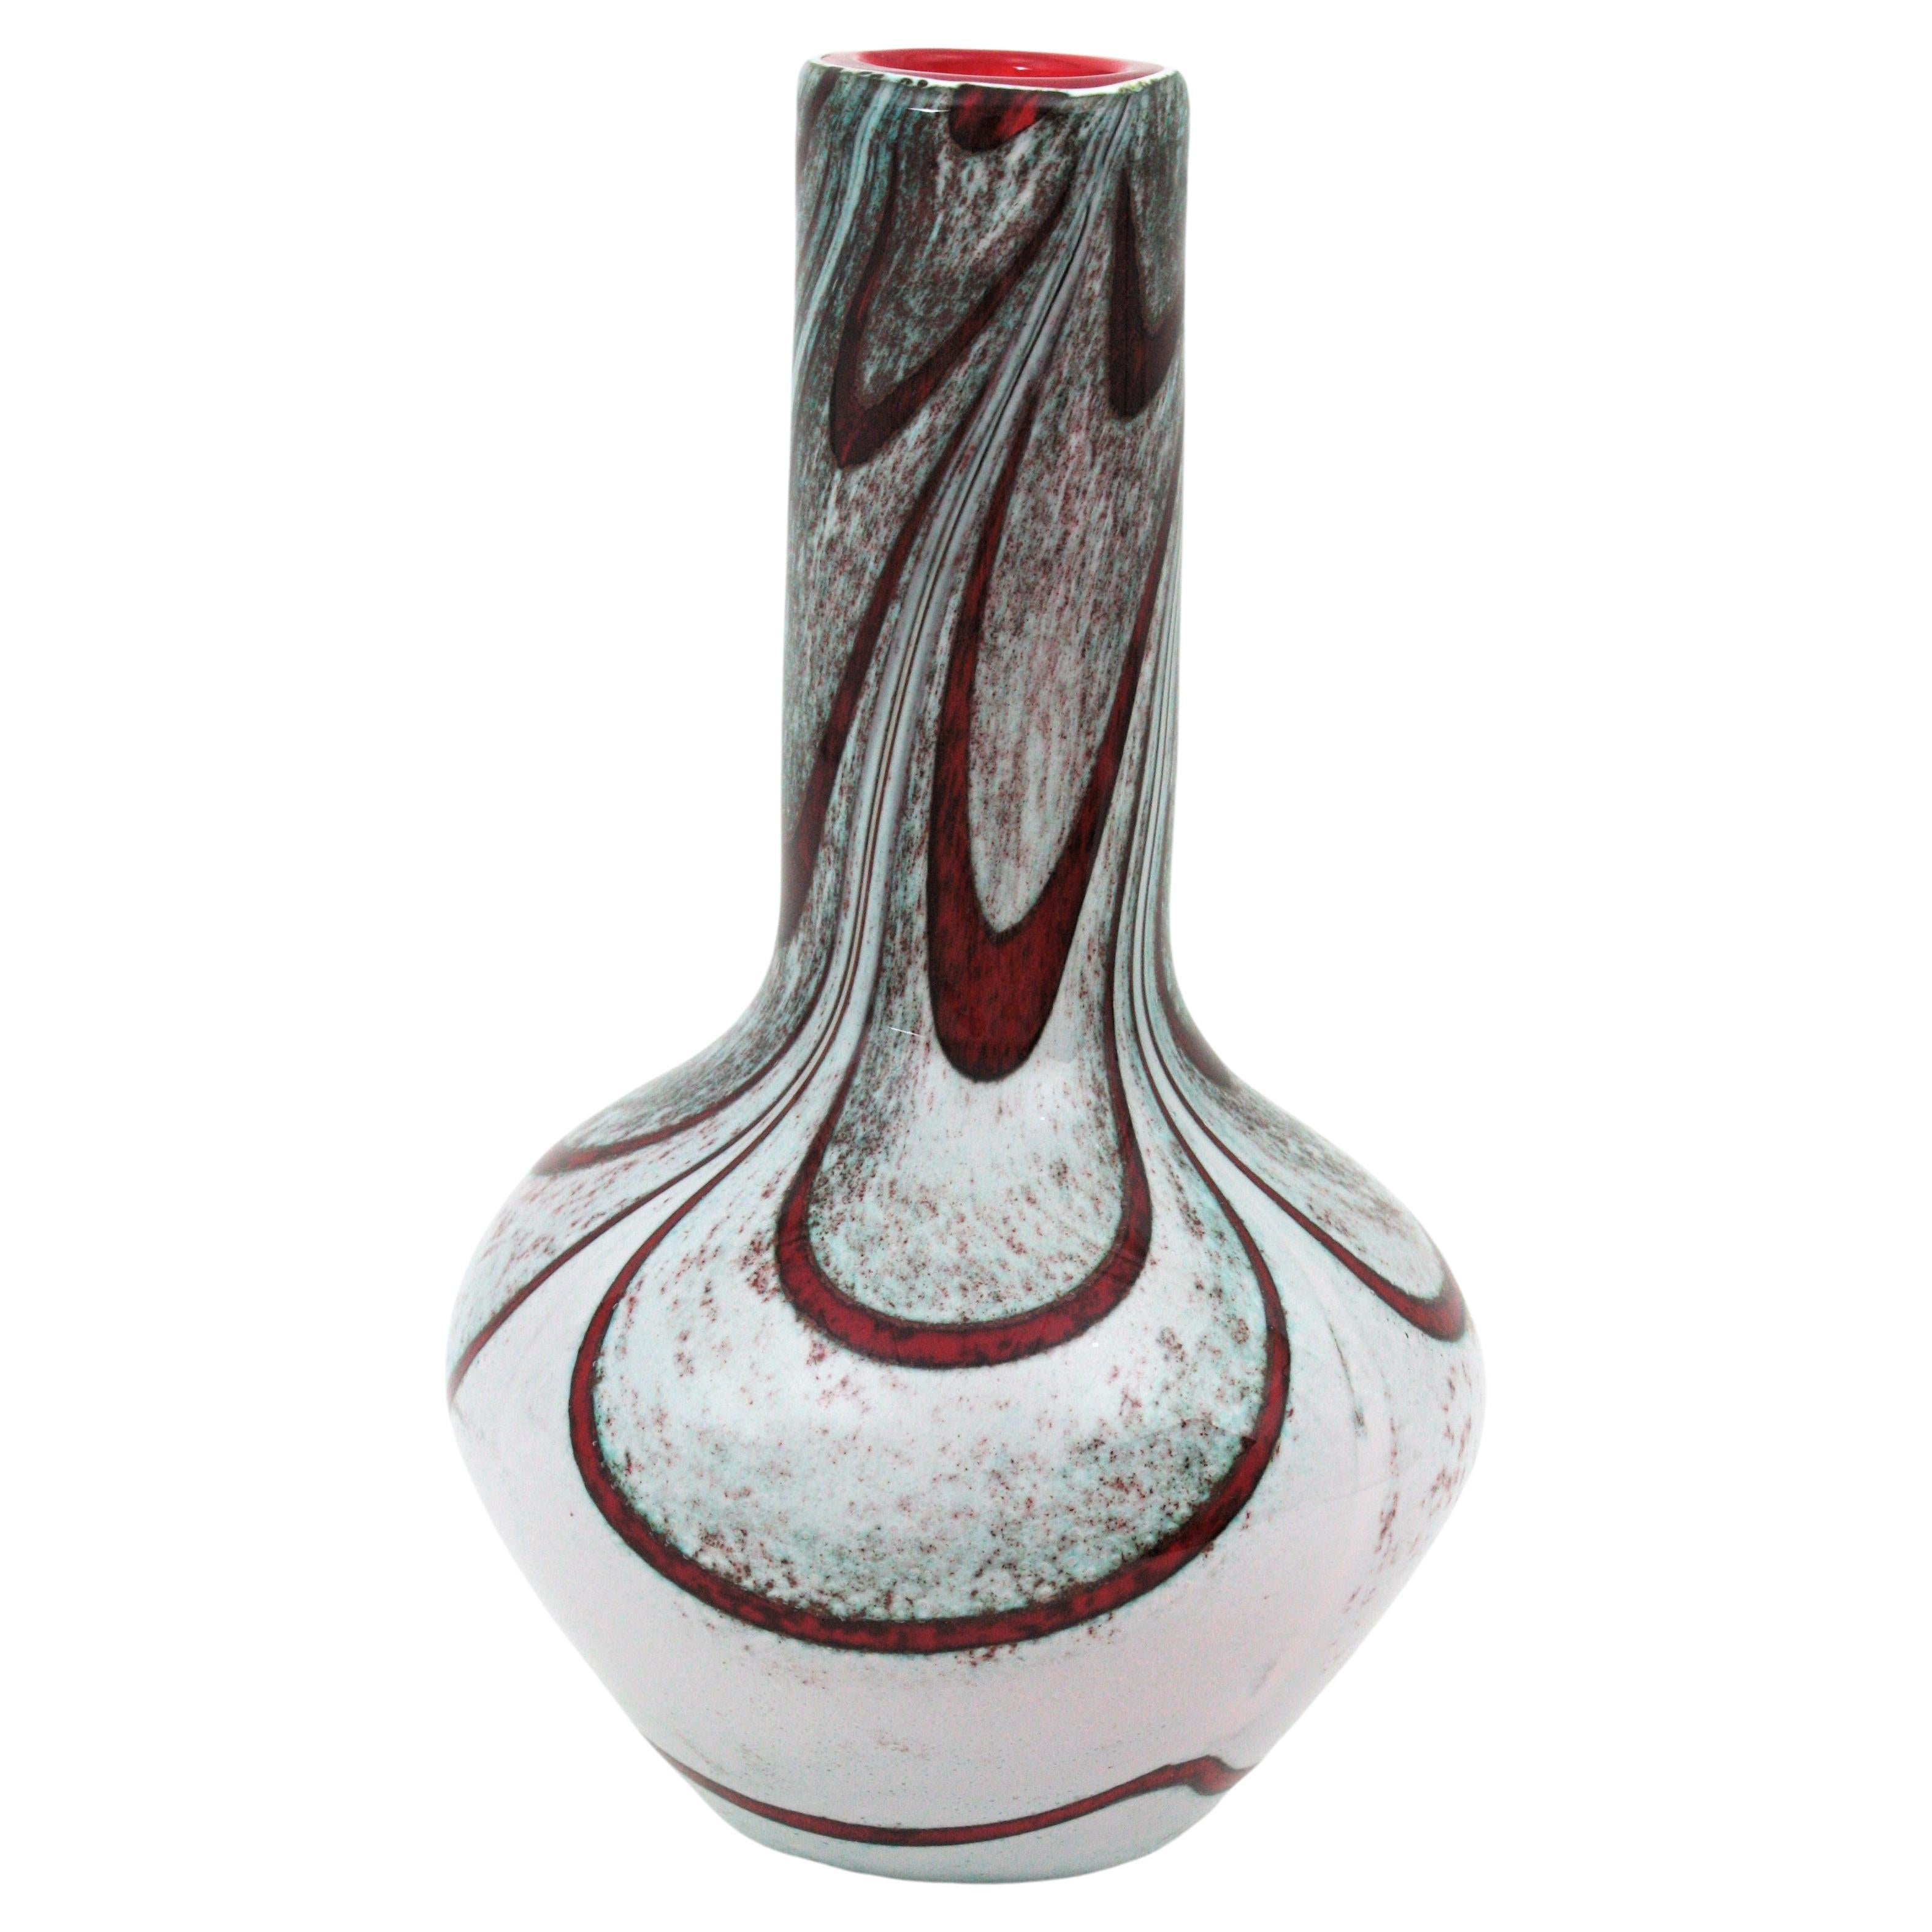 Outstanding Opaline glass marbled vase in white red, gray and blue glass. Attributed to Carlo Moretti and Manufactured by Opaline Florence. Italy, 1960s.
Elegant design. Opaline white glass at the exterior part with stripes in red clear glass and